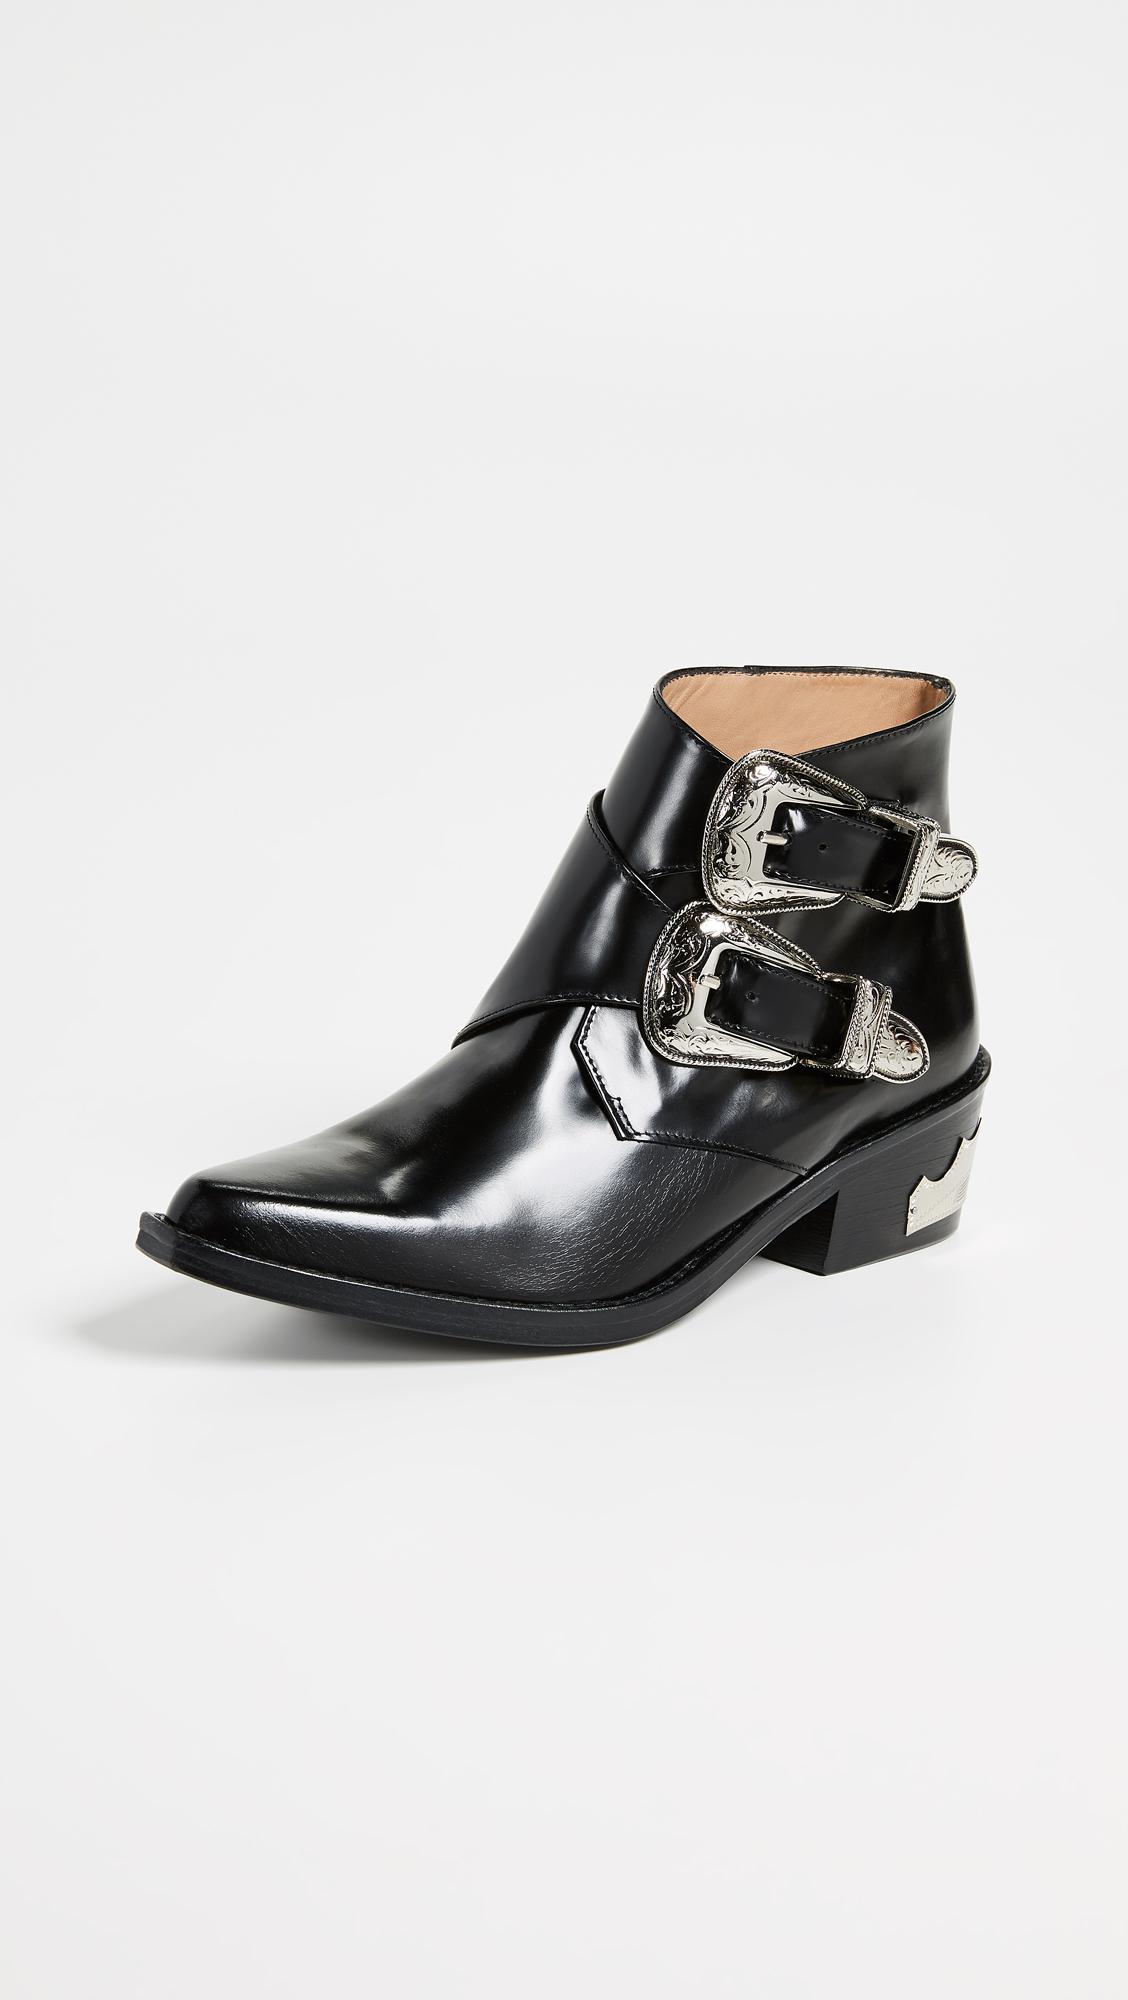 Toga Leather Two Band Buckle Boots in Black - Lyst